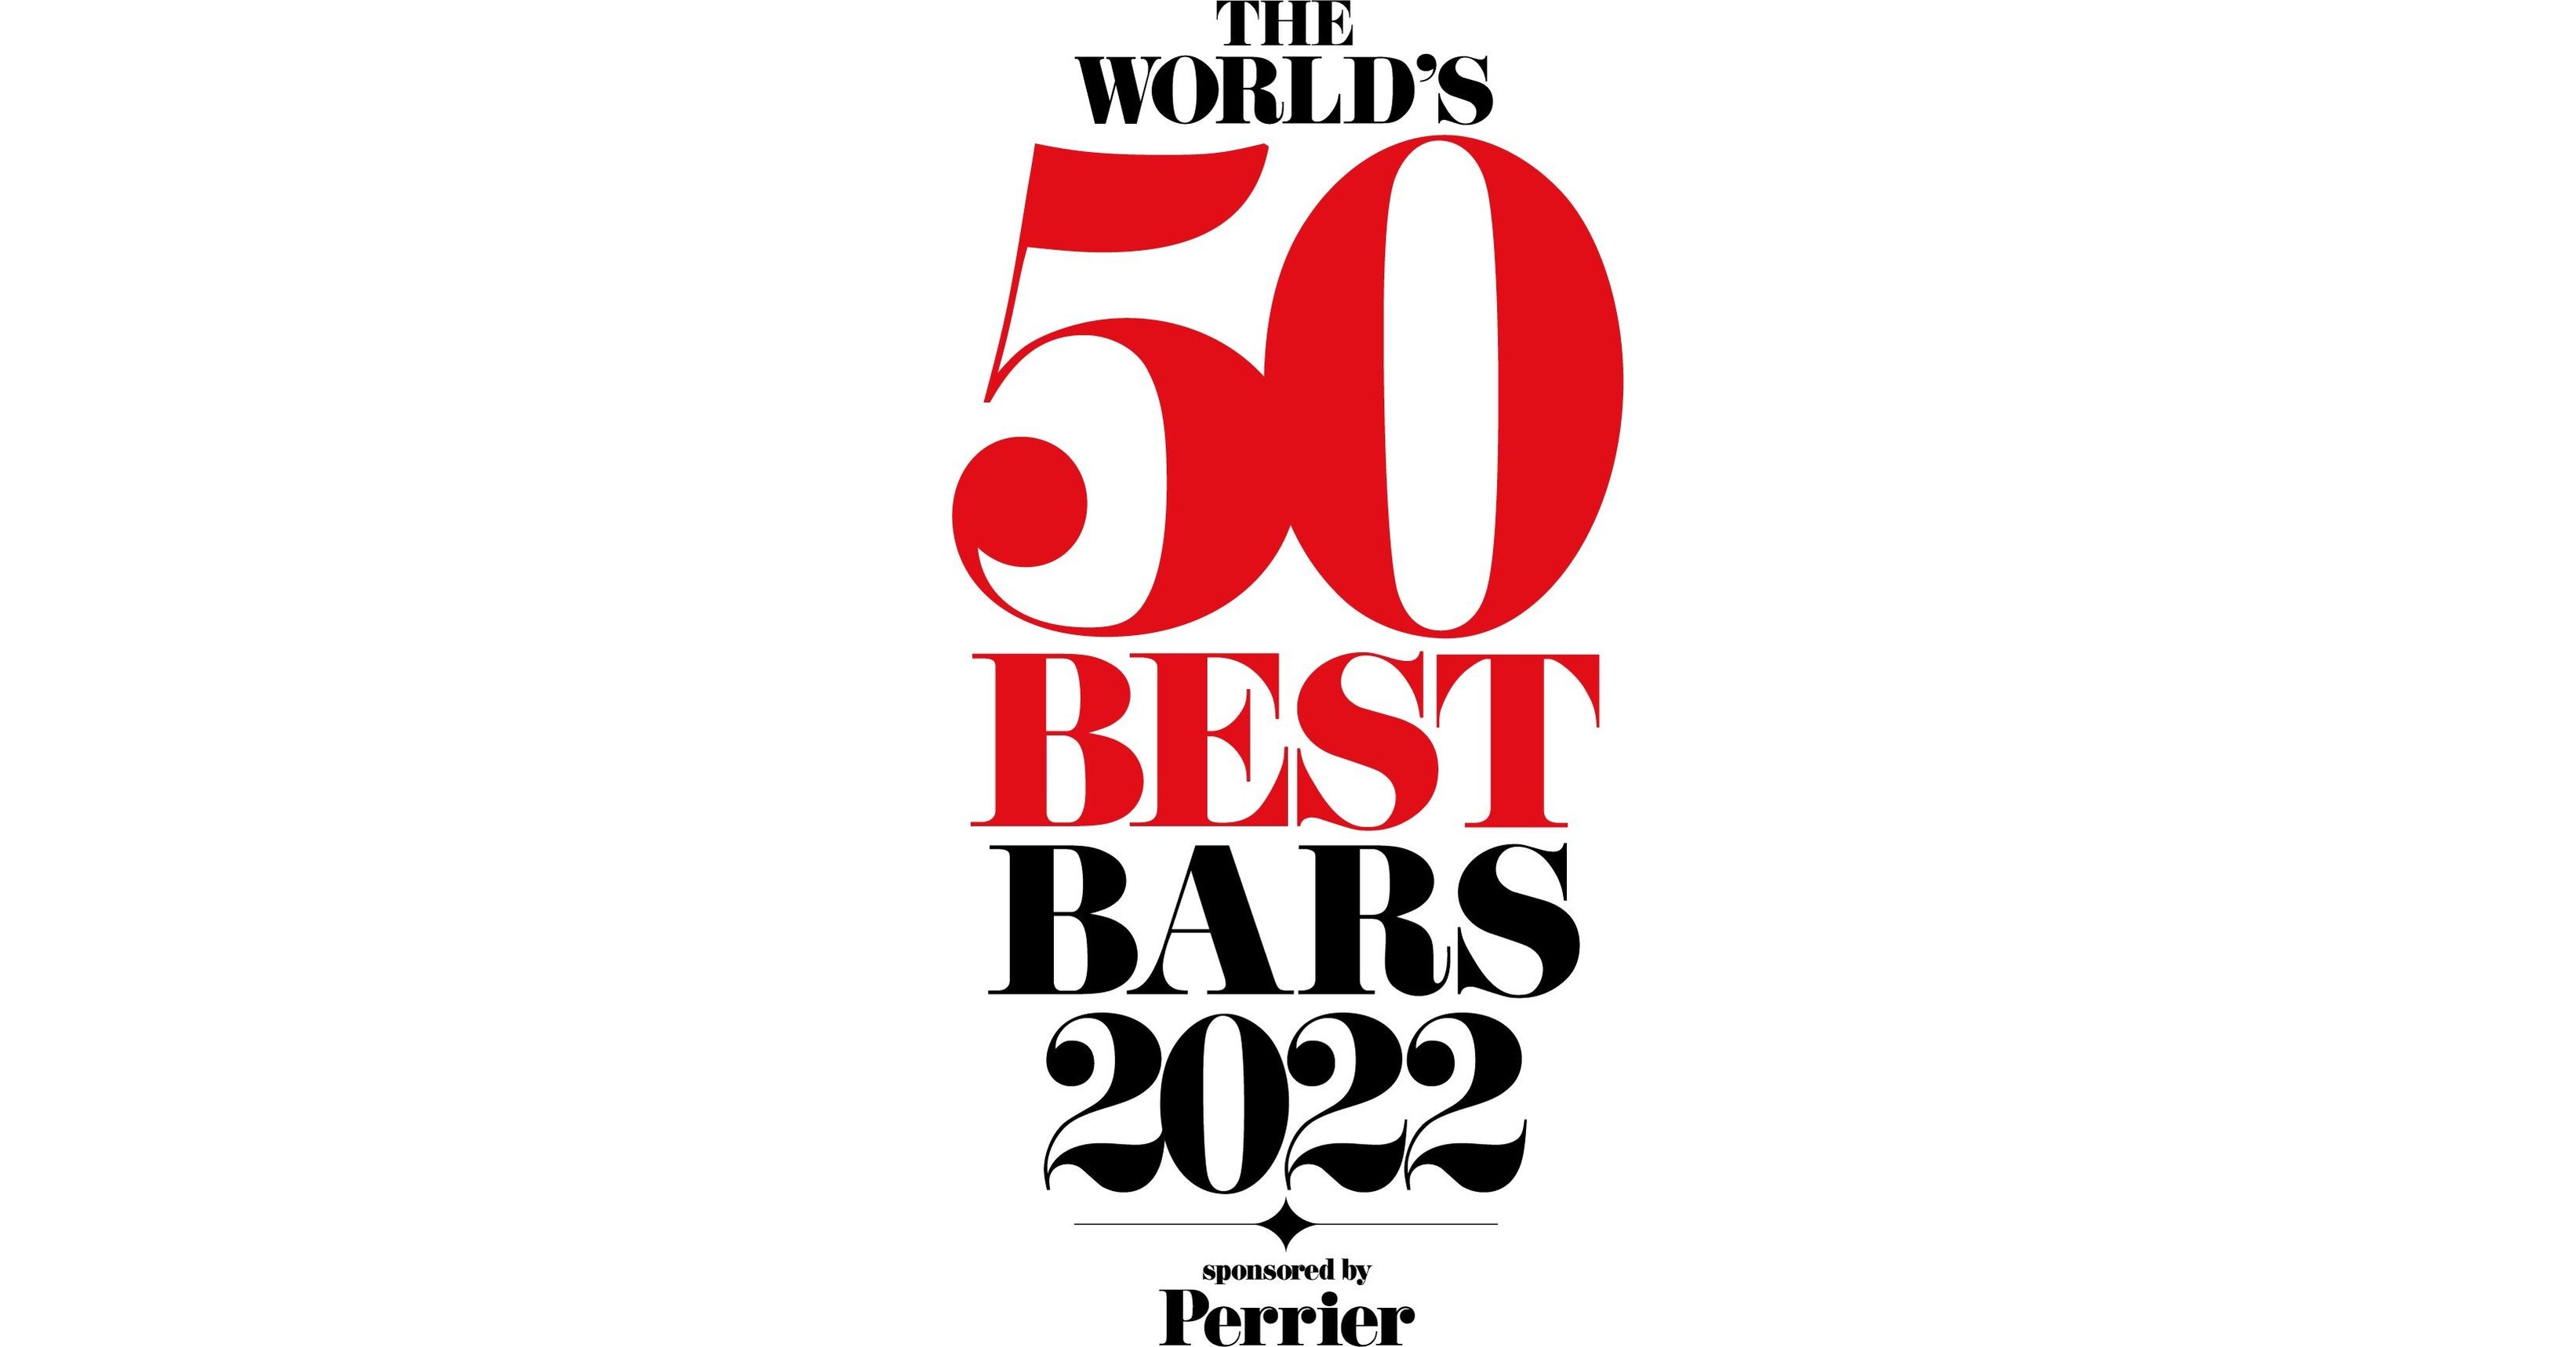 PARADISO IN BARCELONA NAMED THE WORLD'S BEST BAR, SPONSORED BY PERRIER